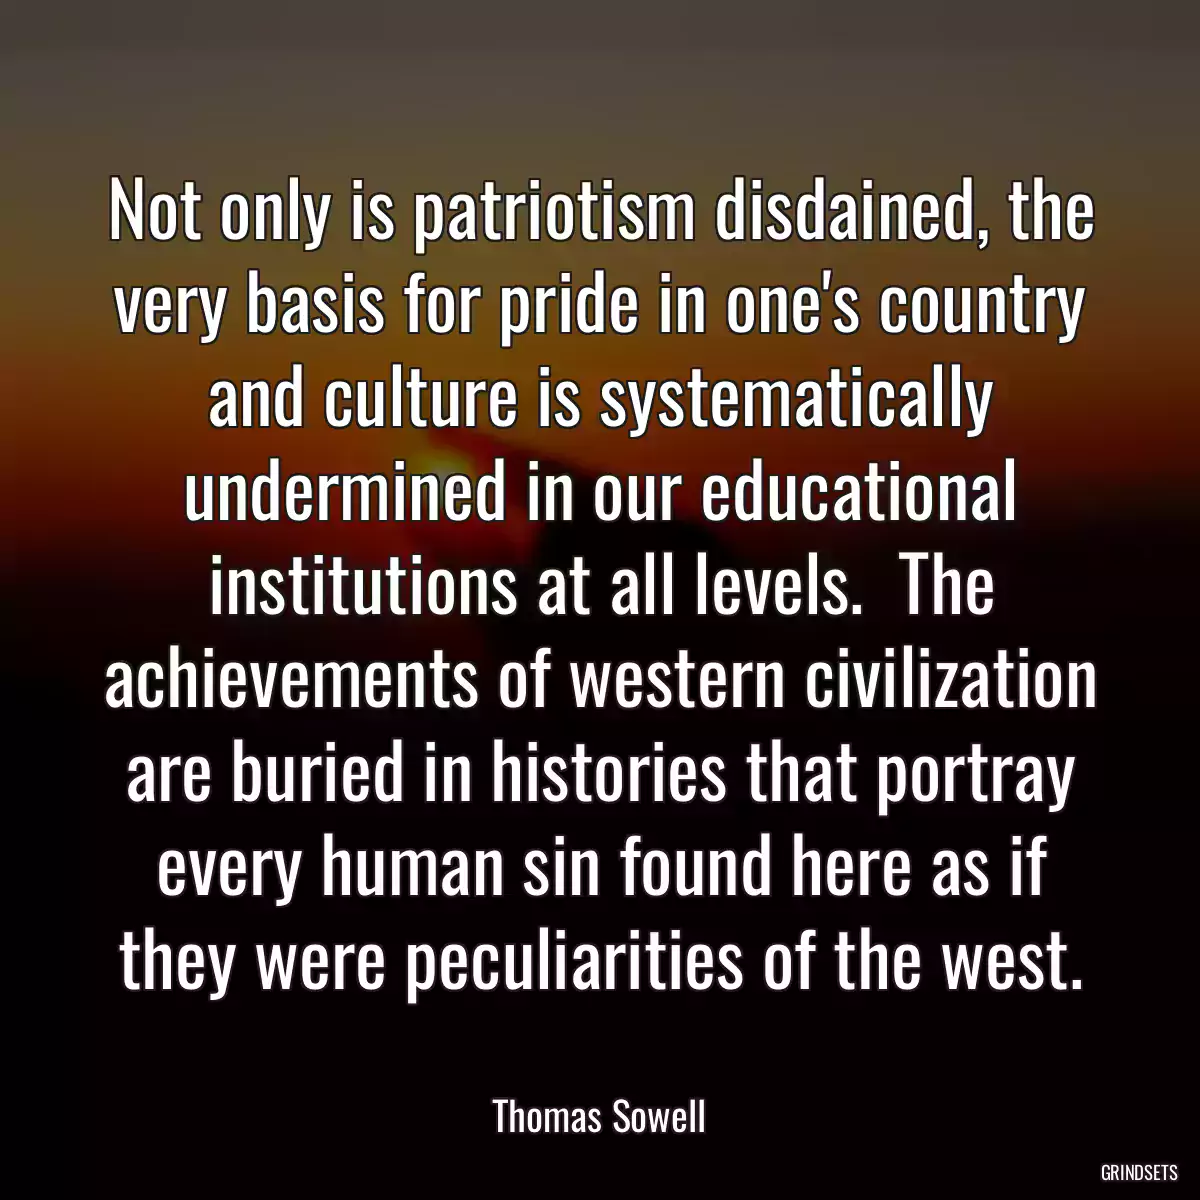 Not only is patriotism disdained, the very basis for pride in one\'s country and culture is systematically undermined in our educational institutions at all levels.  The achievements of western civilization are buried in histories that portray every human sin found here as if they were peculiarities of the west.